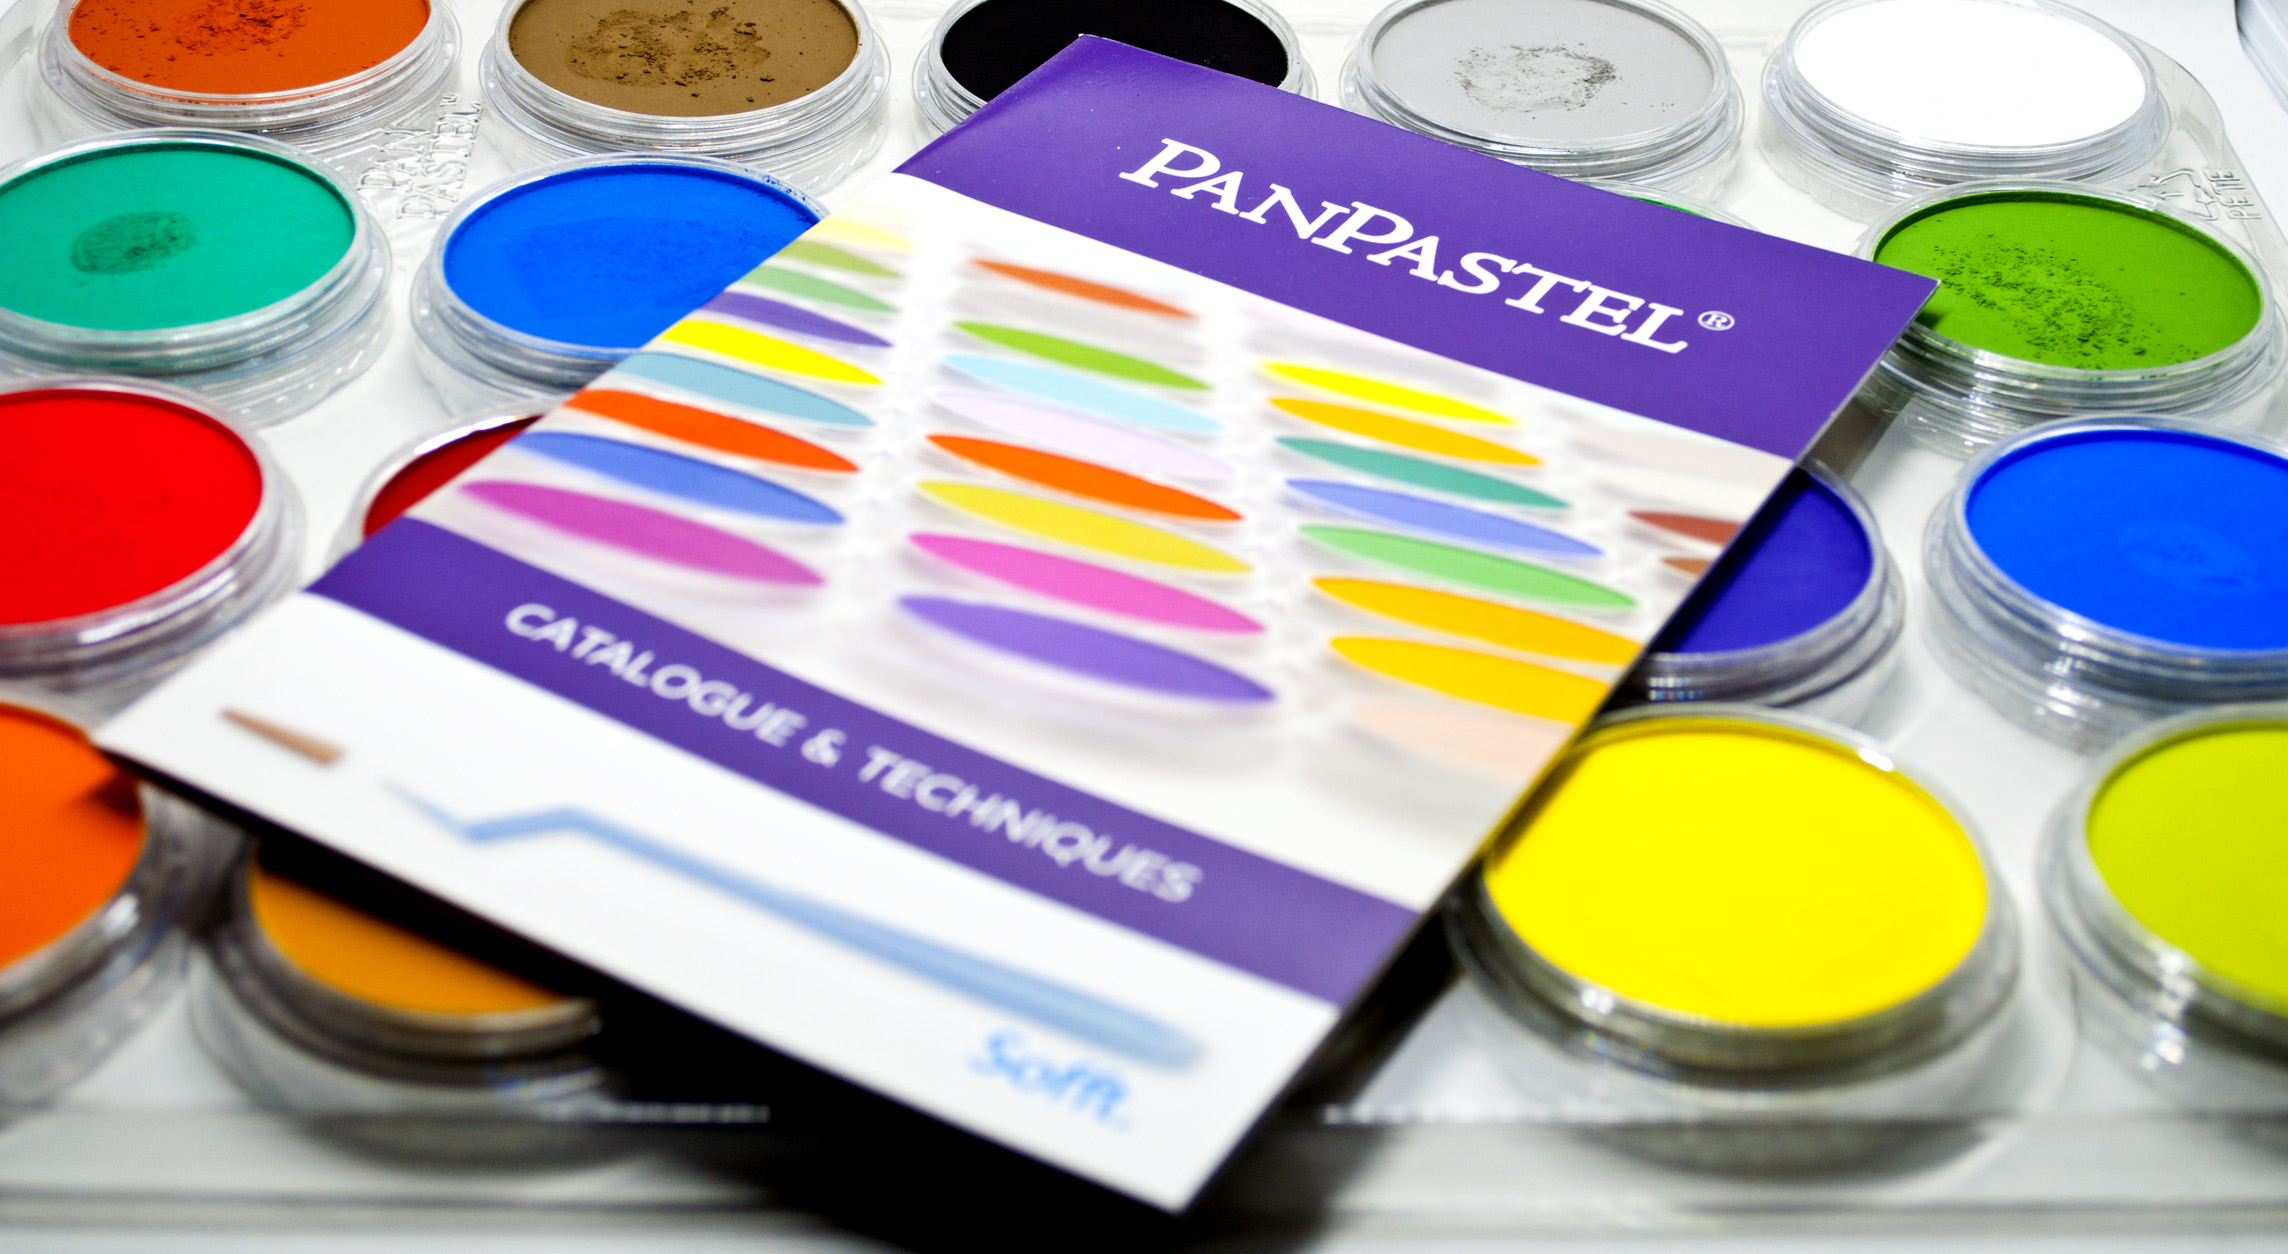 Pan Pastel Review — The Art Gear Guide